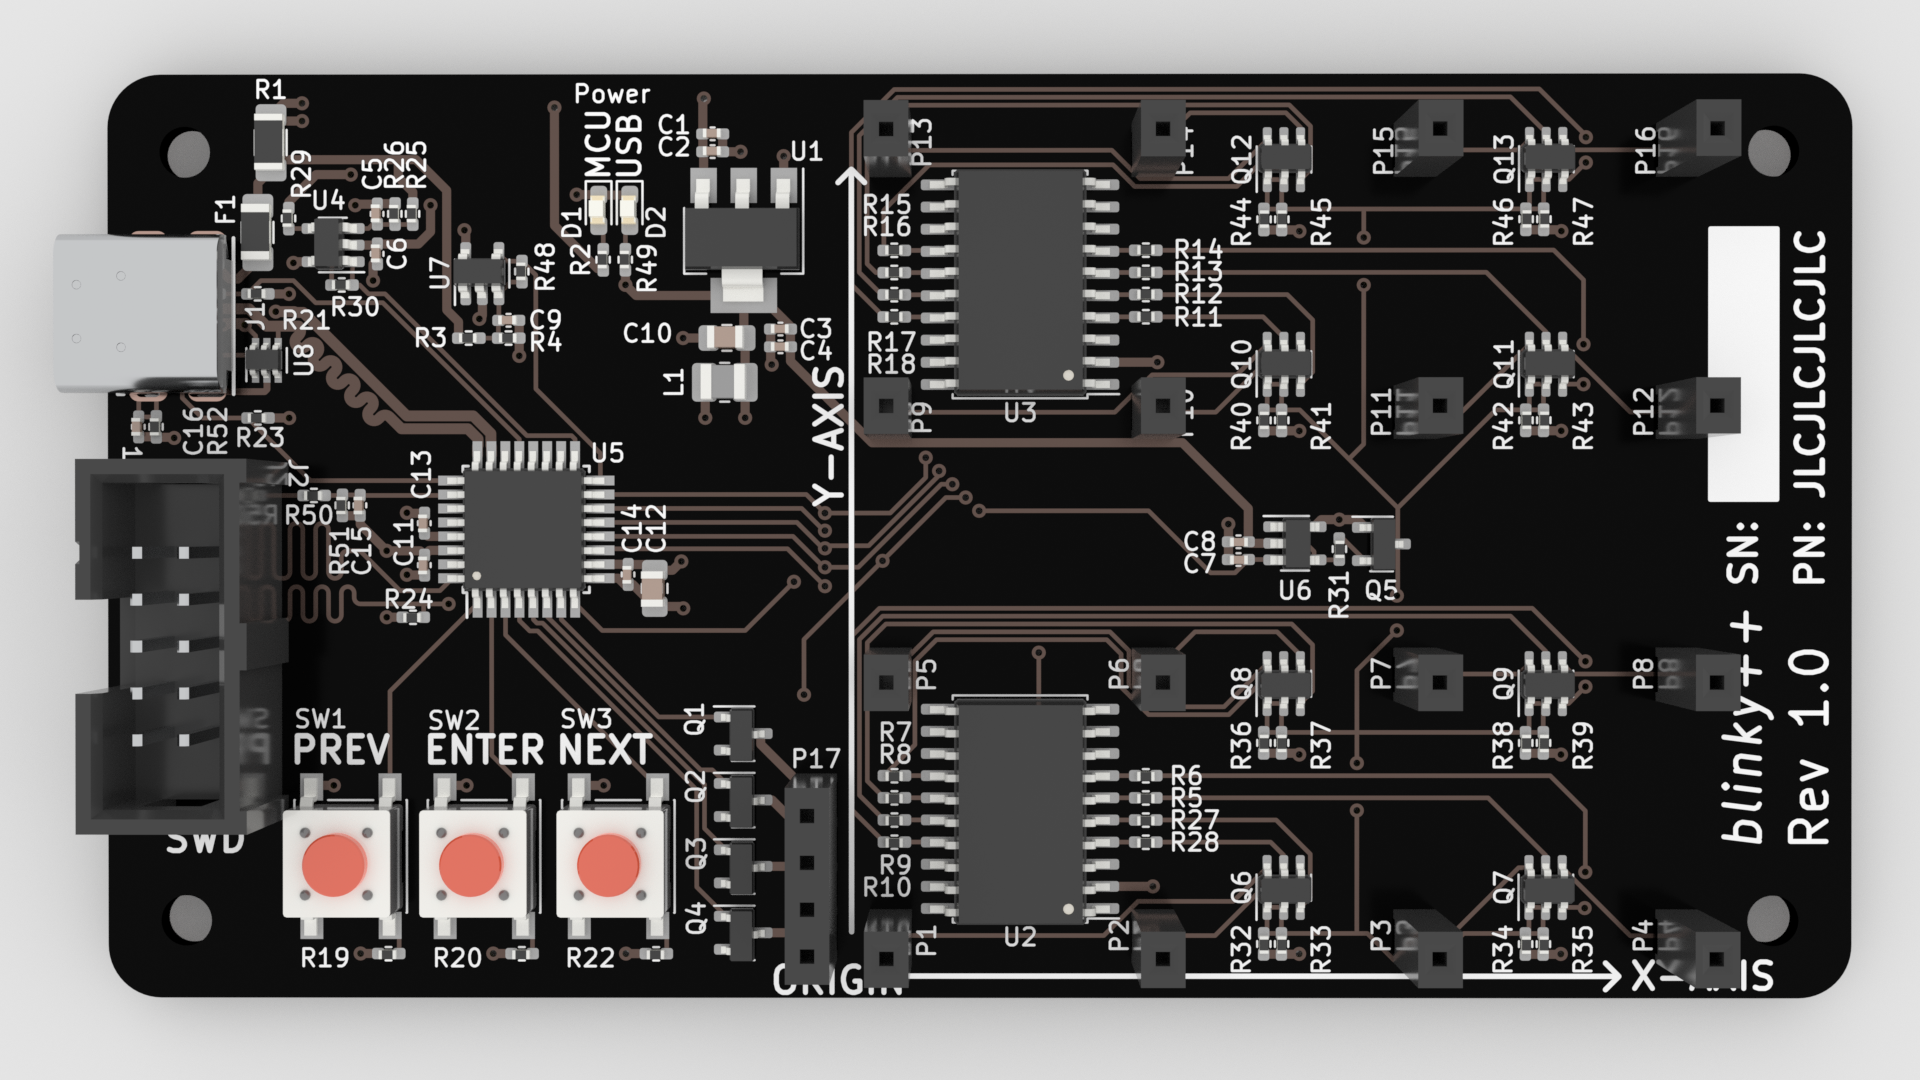 Board-Only Rendering (no LEDs), Top View